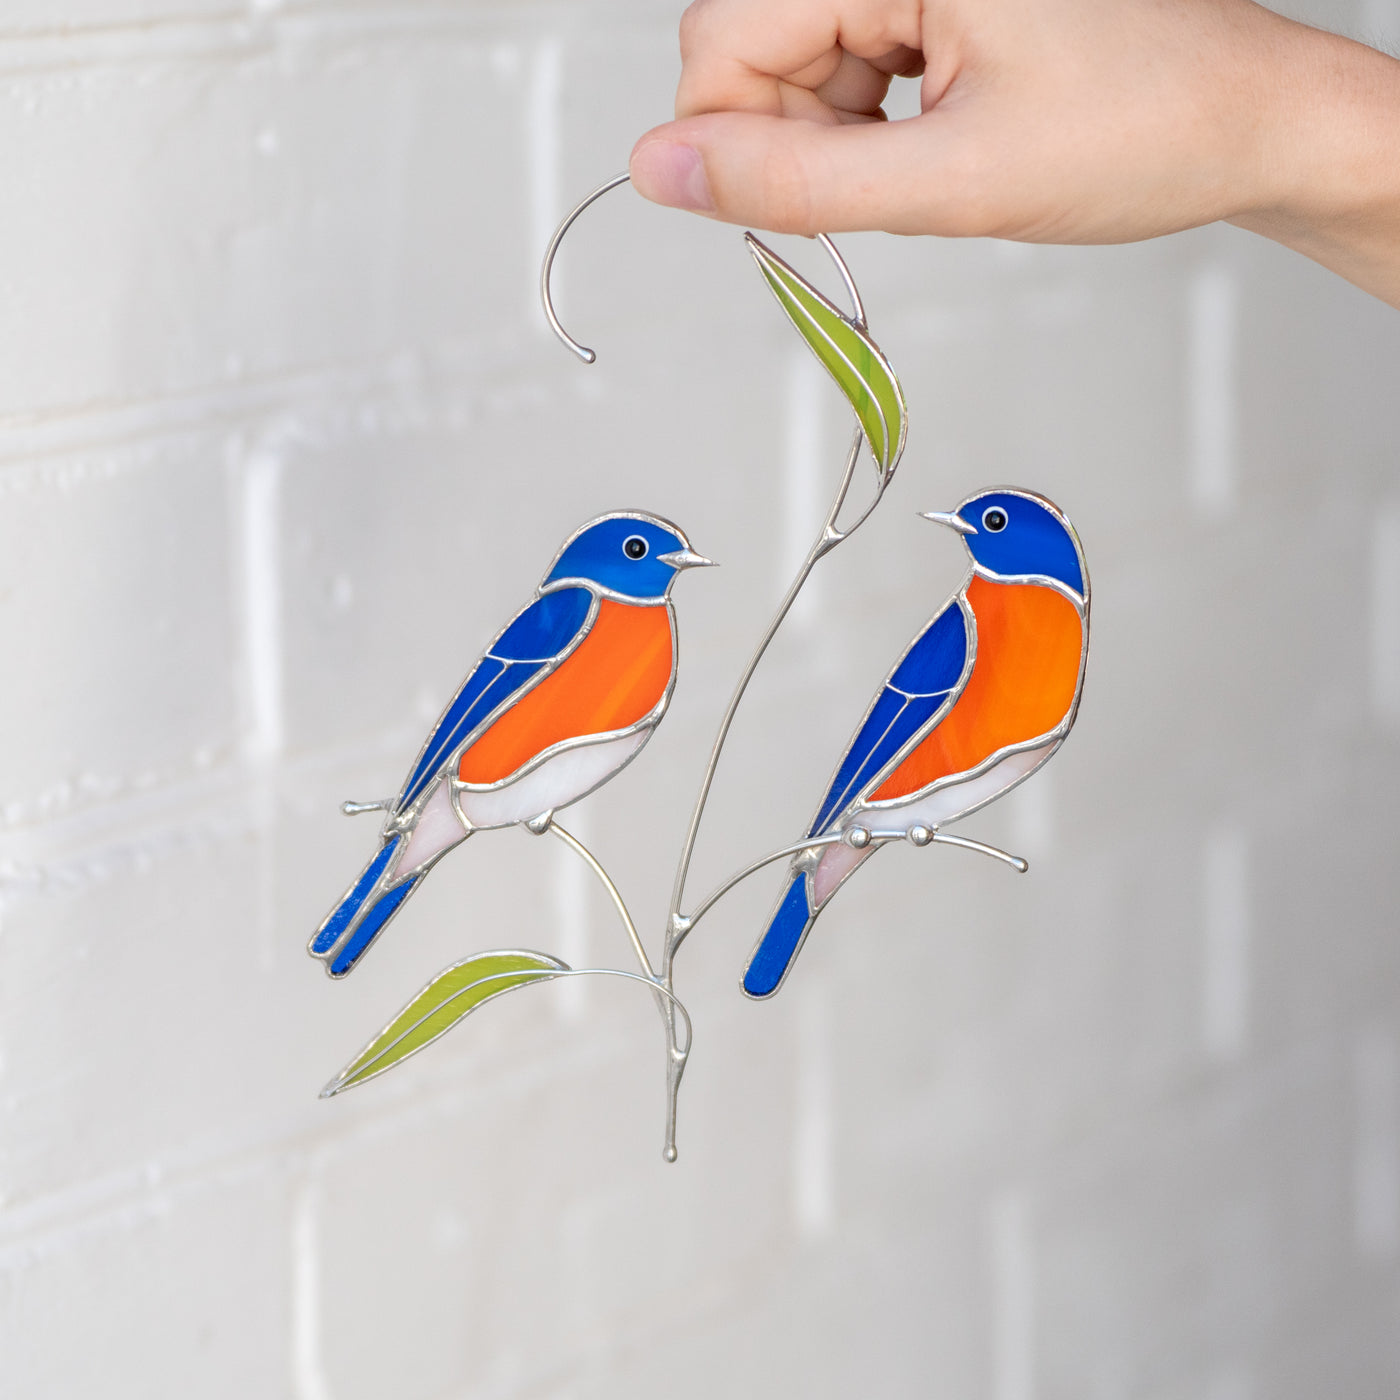 Stained glass suncatcher of two bluebirds sitting on the branch